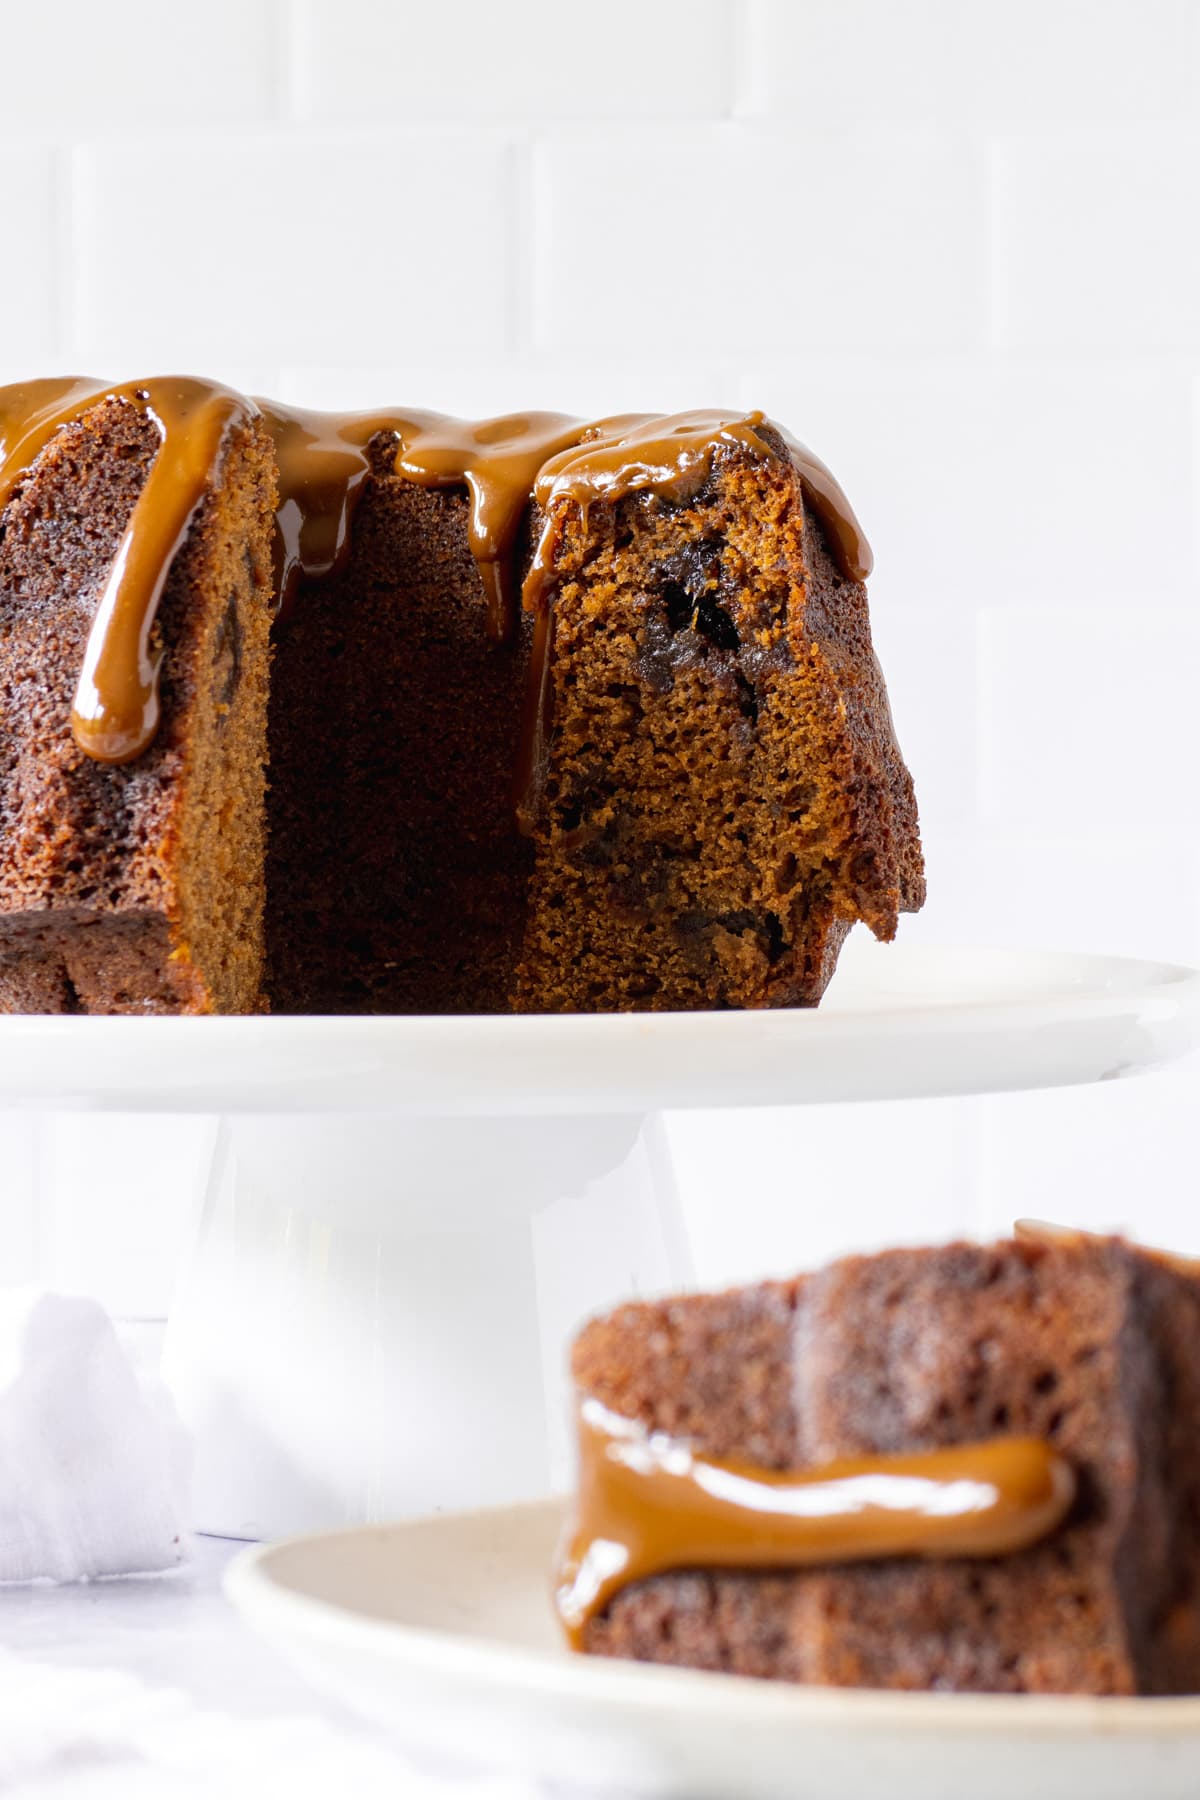 Slice of toffee cake with a toffee sauce drip